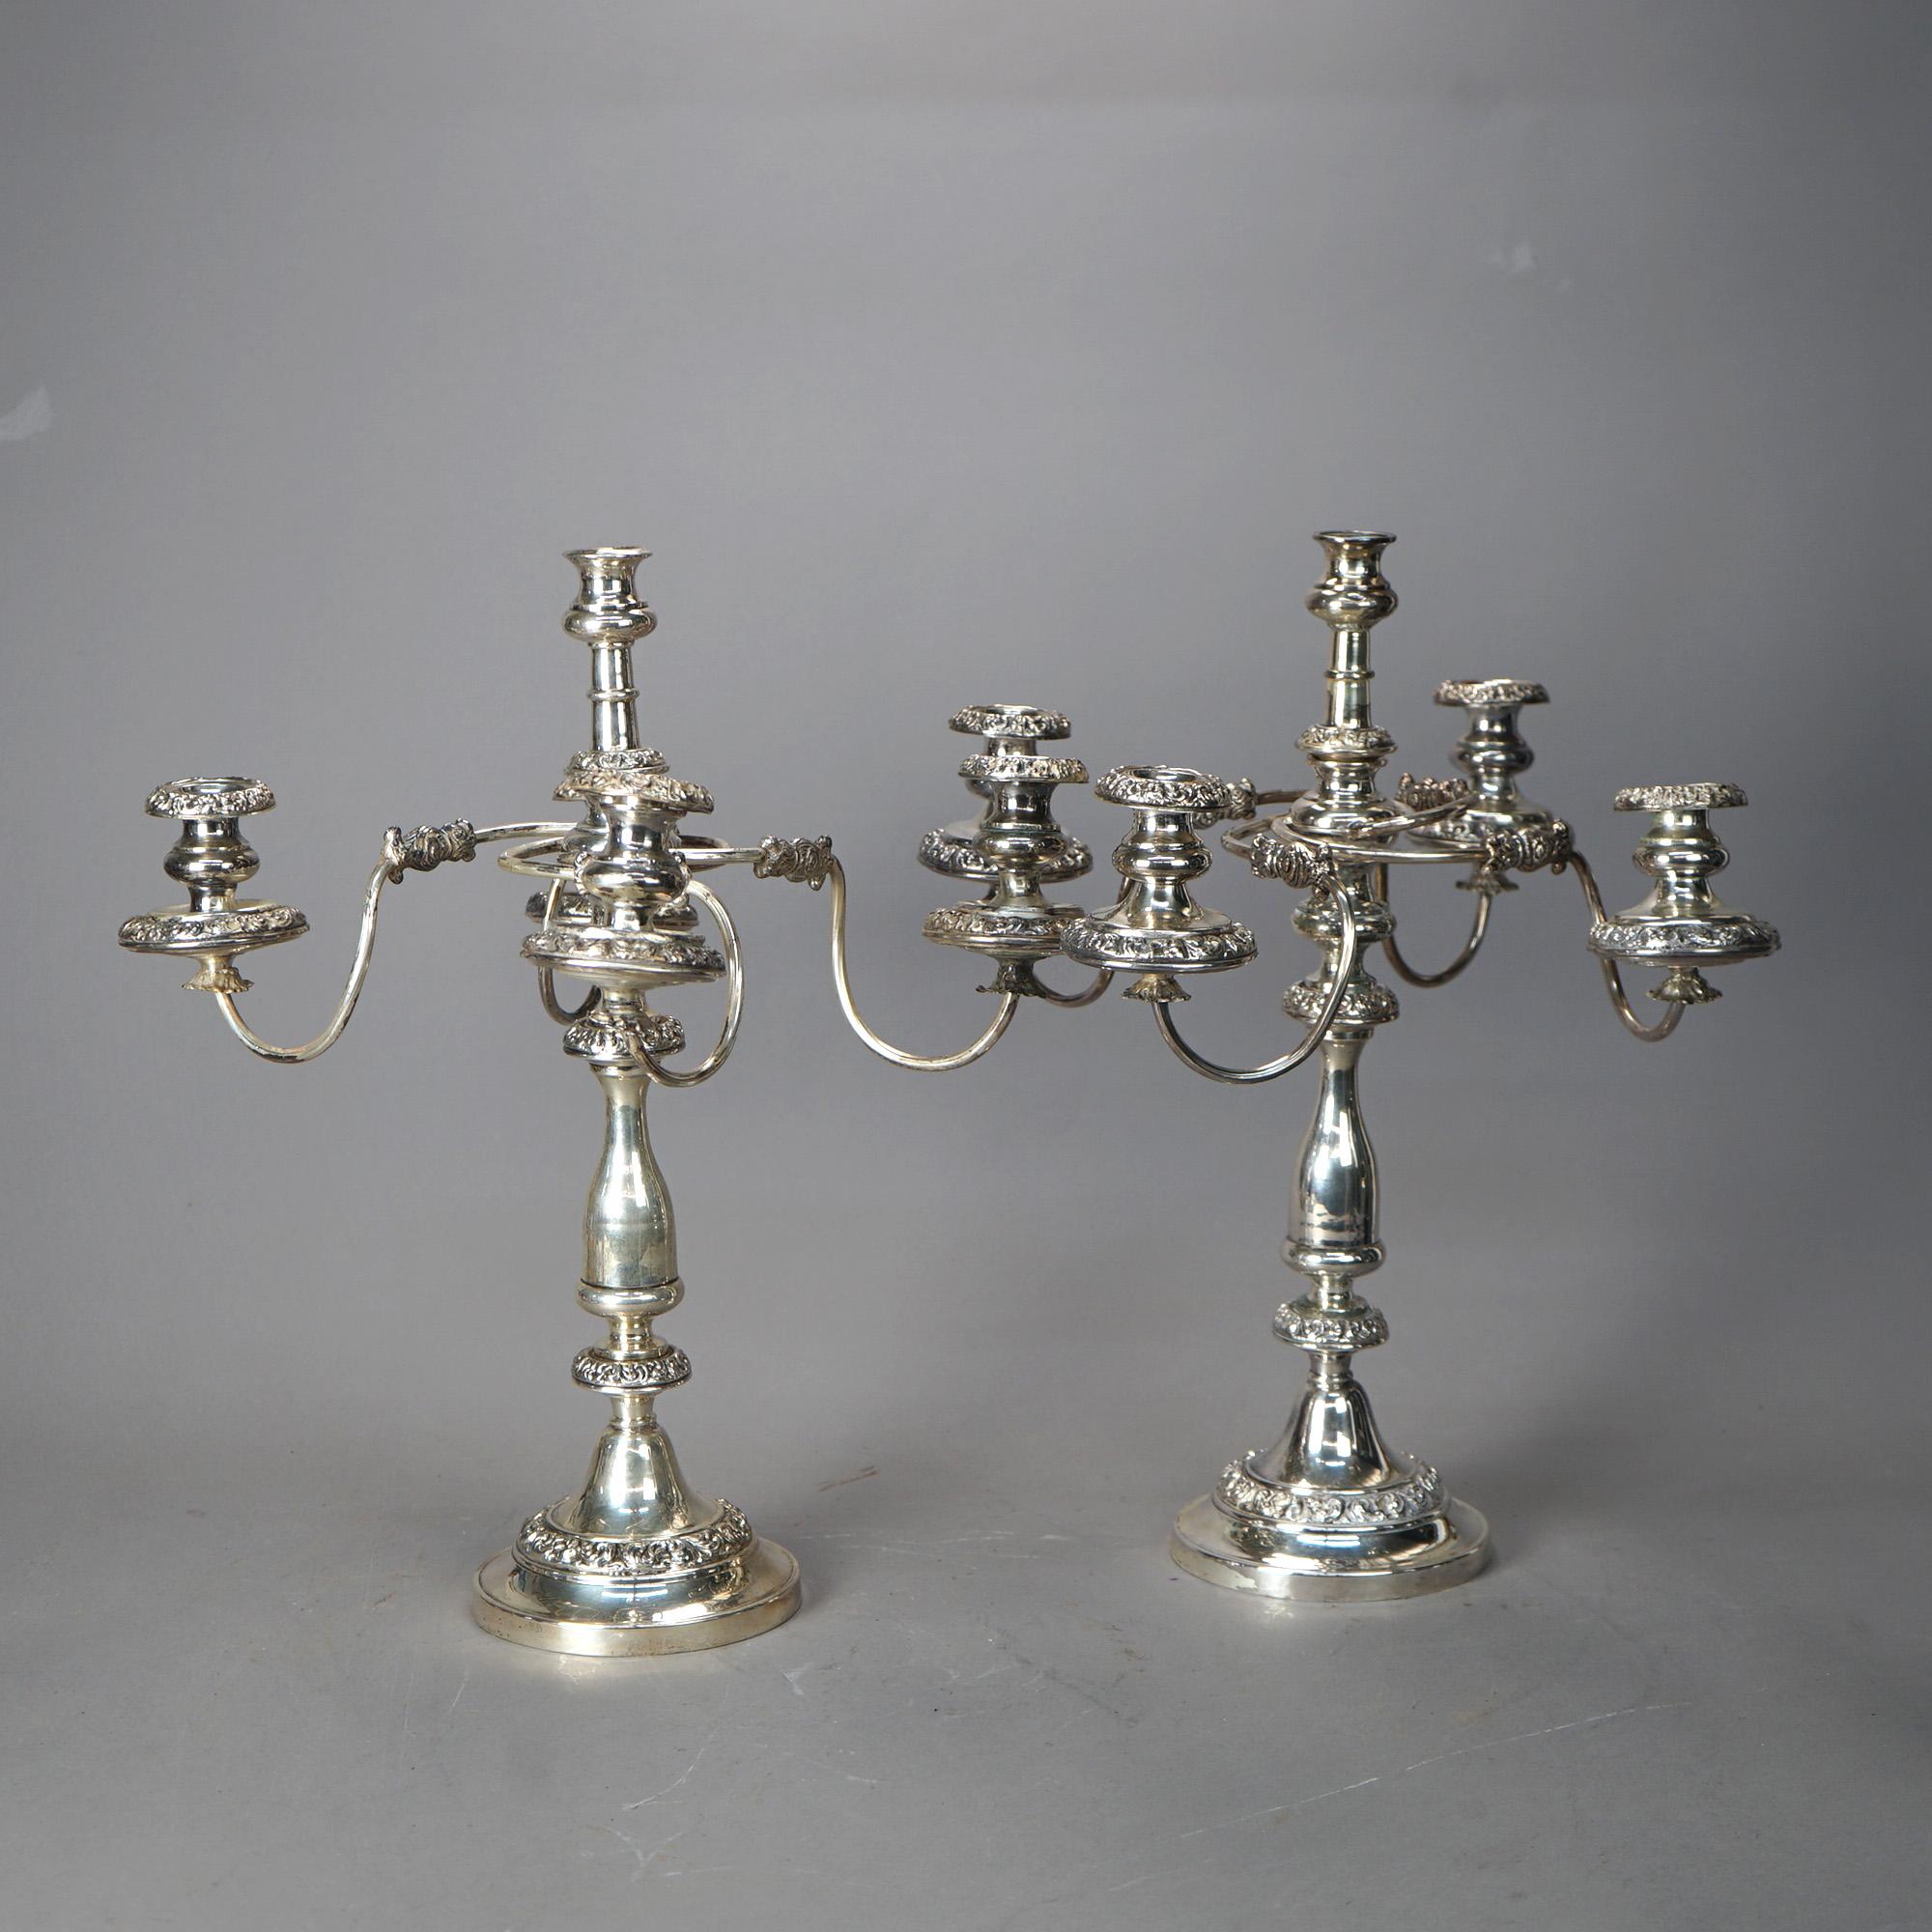 An antique pair of Georgian style candle sticks offer silver plate construction with scroll arms and five lights, c1900

Measures - 20